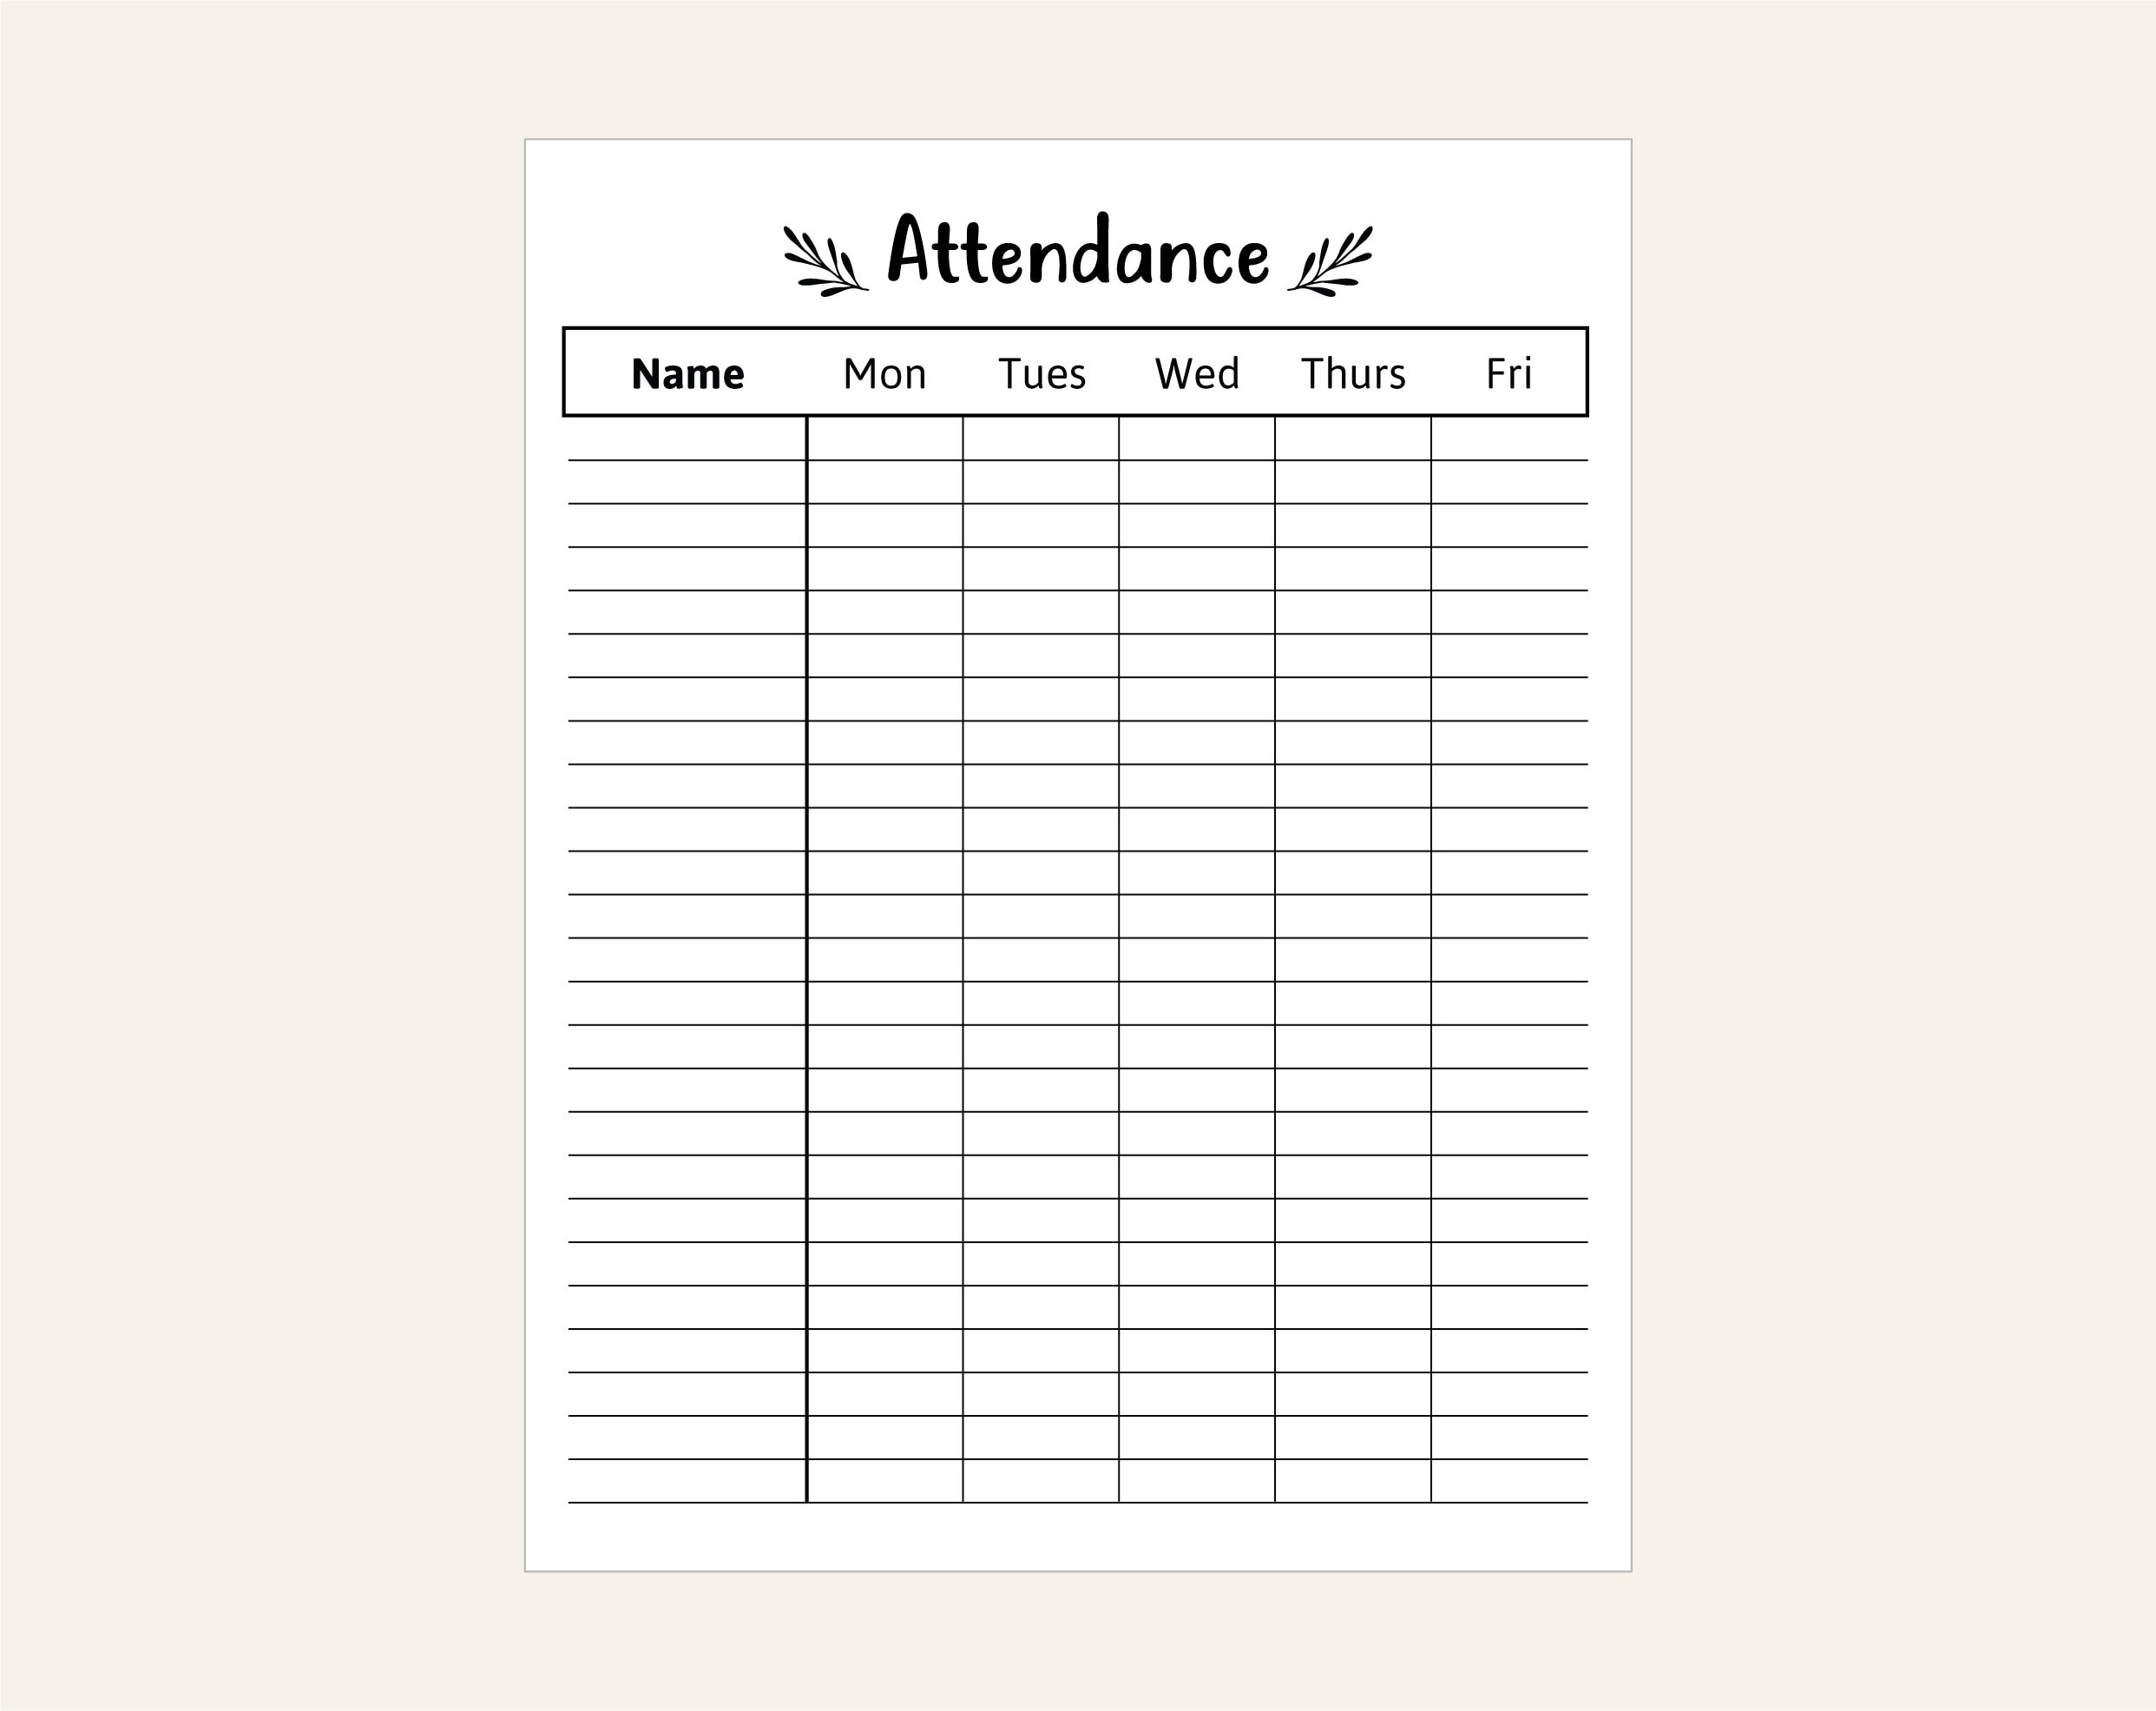 Weekly Attendance Sheet For Teachers Prints For Classroom Substitute Sub Kid Student Organizer Class Stationery Printable Resources Etsy - Free Printable Attendance Forms For Teachers